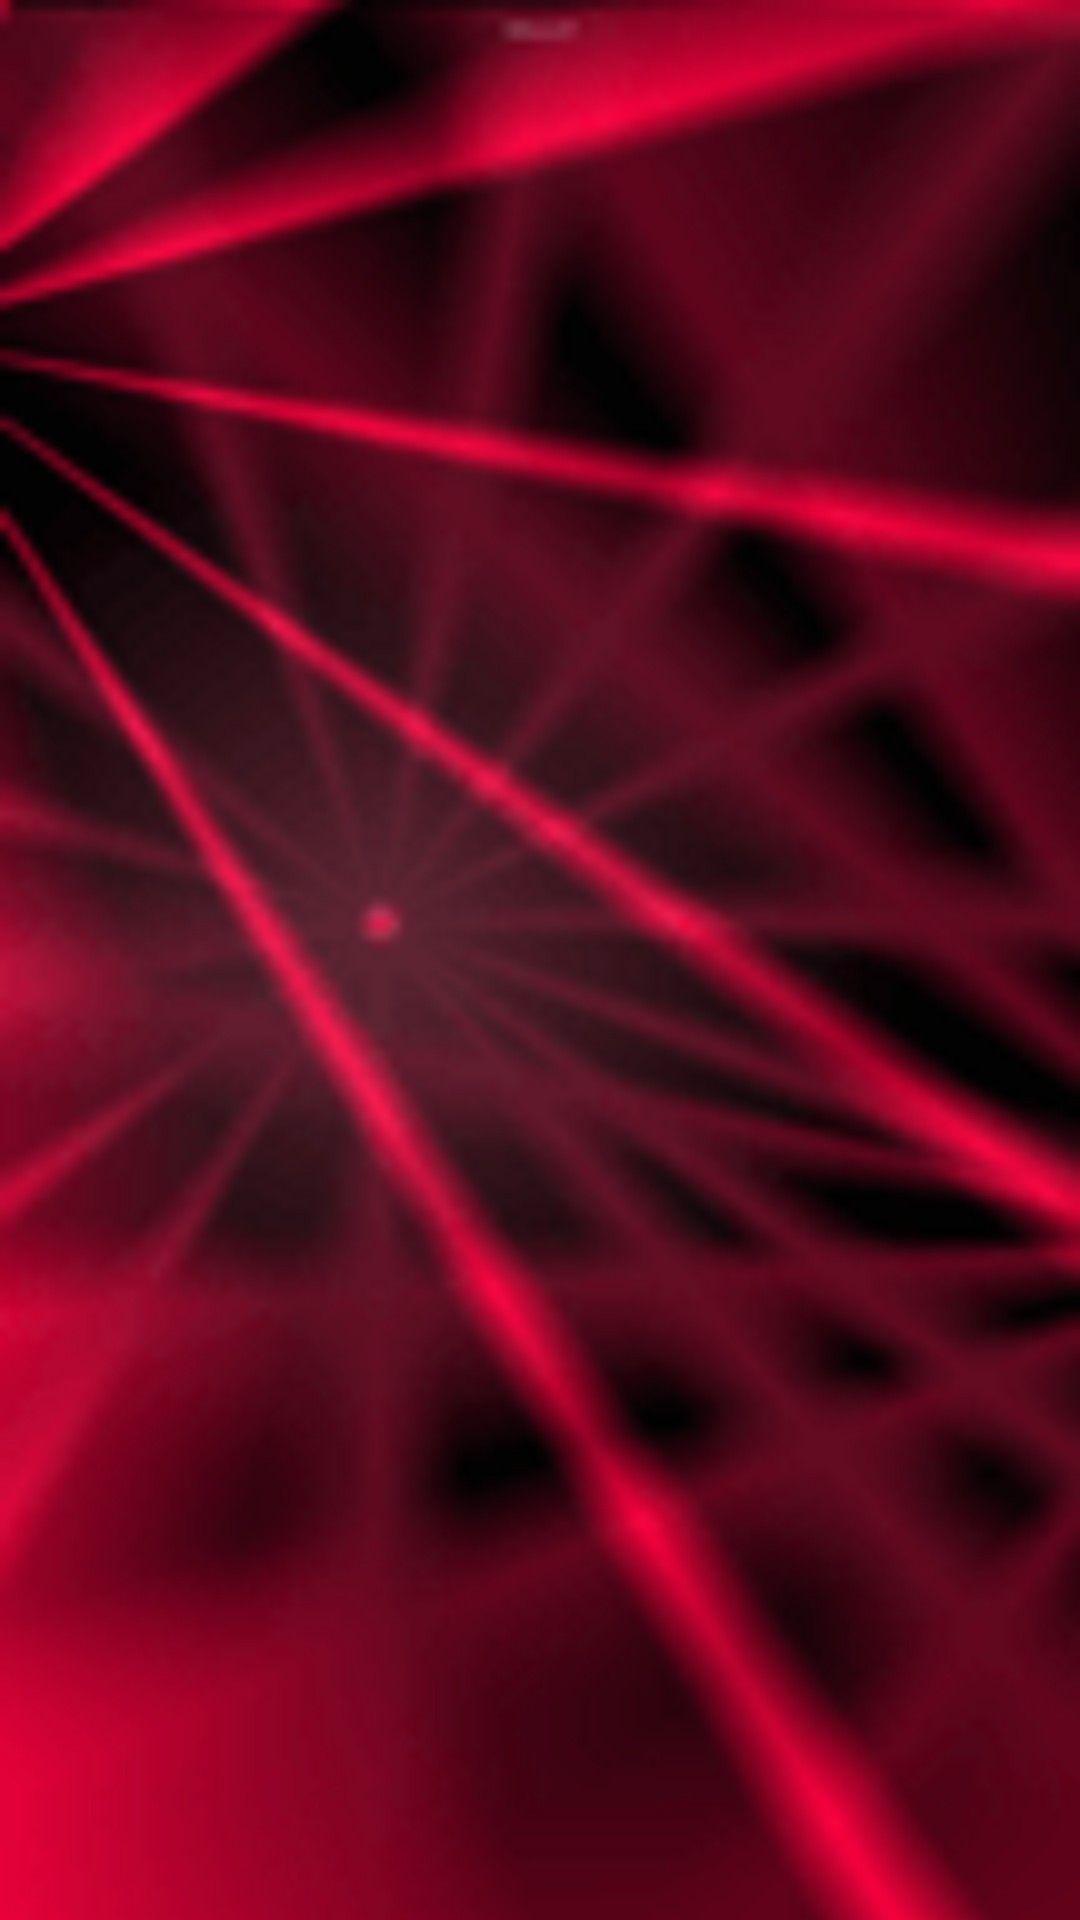 light red laser to see more abstract wallpaper! - Cute galaxy wallpaper, Light effect photohop, Light red